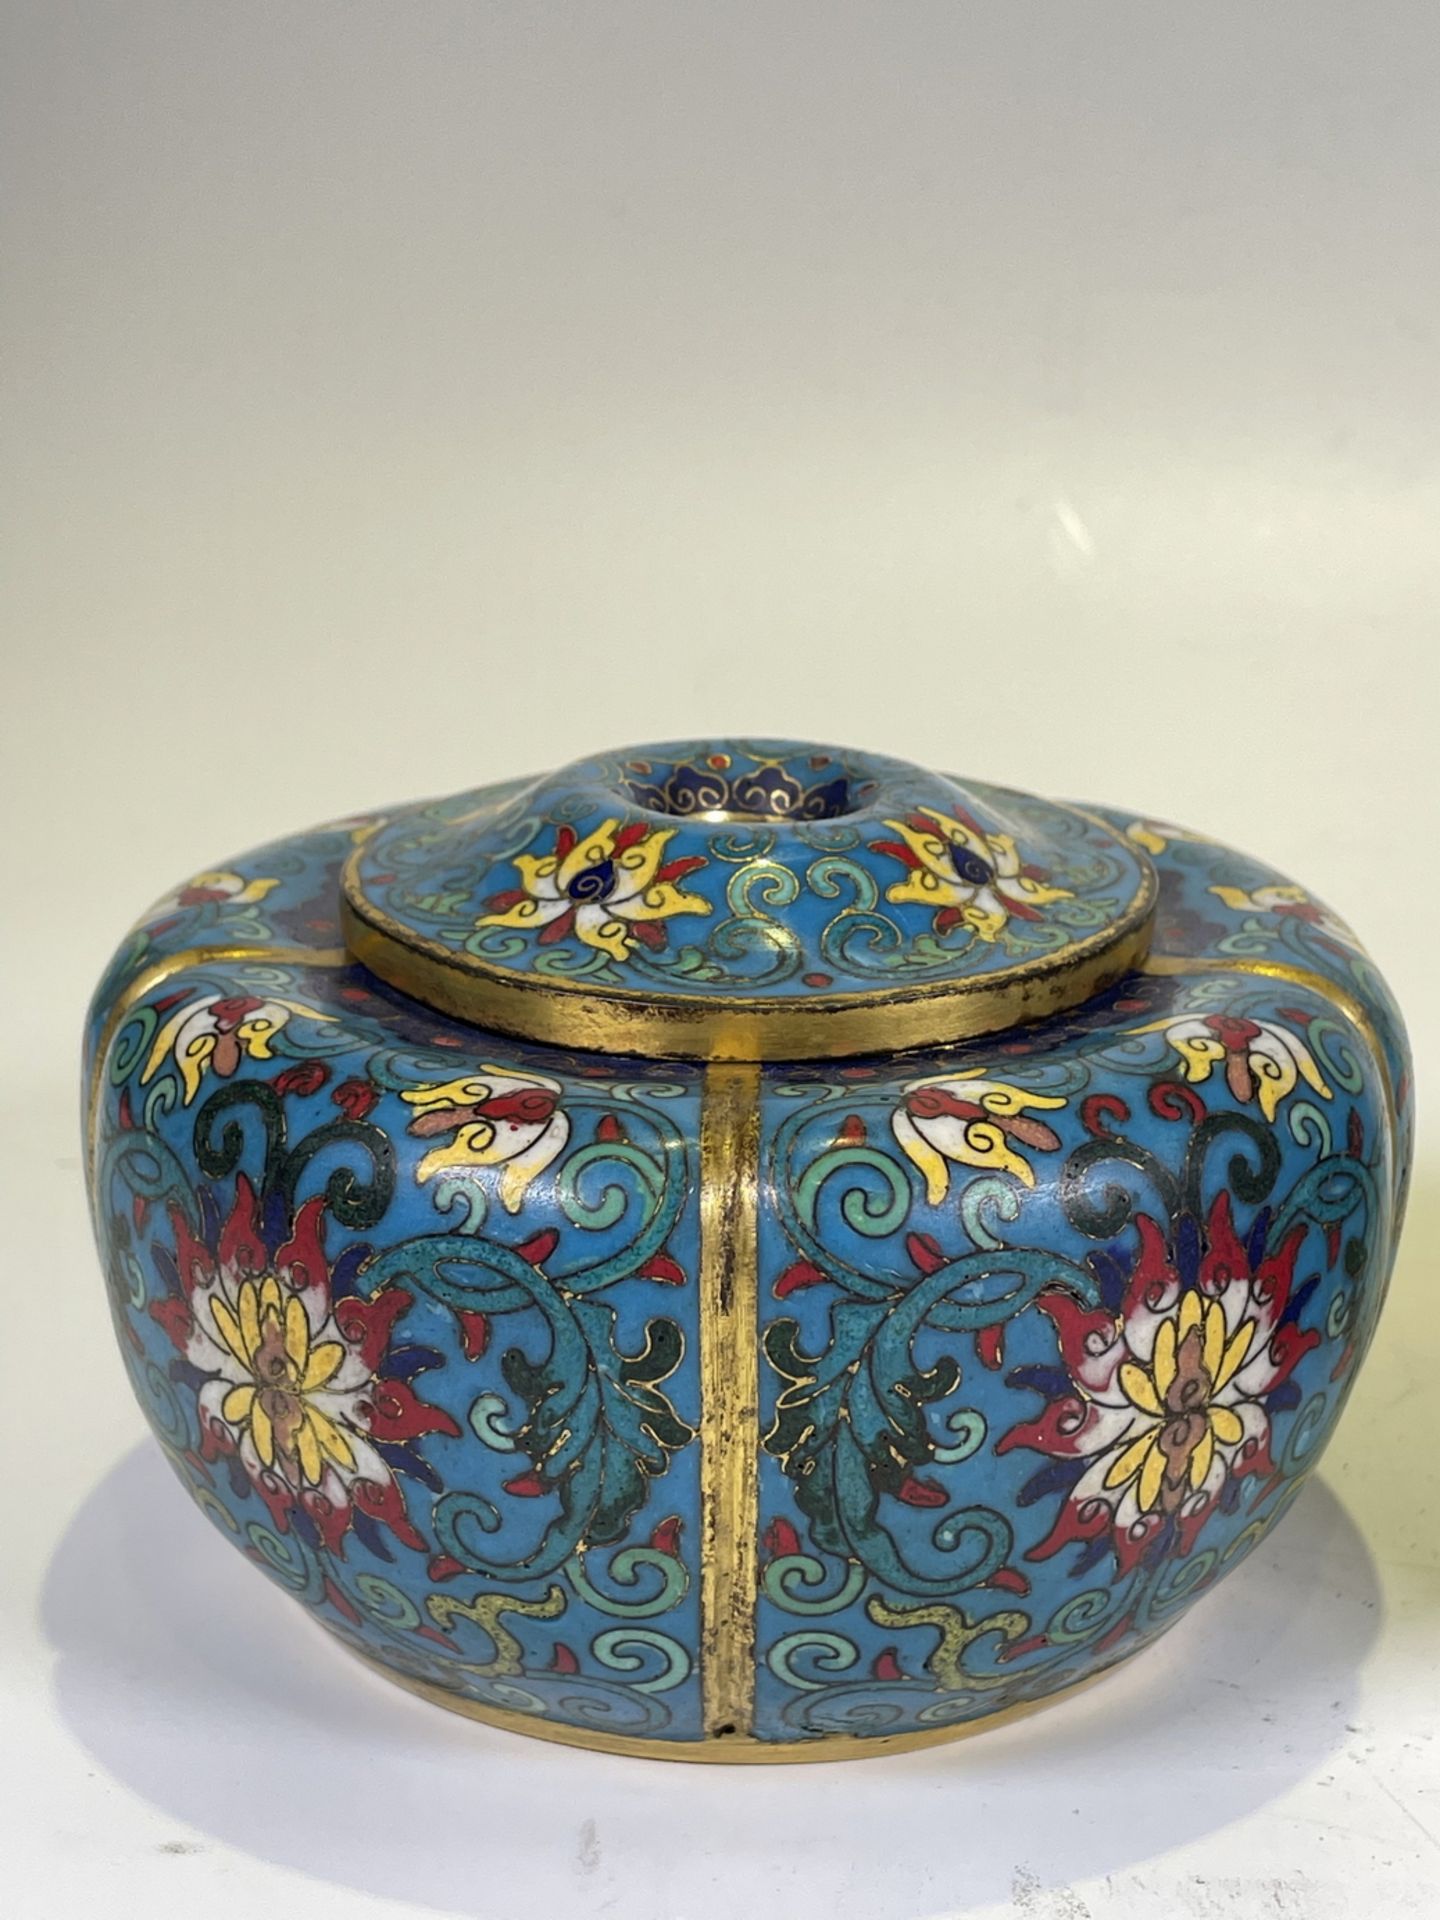 FINE CHINESE CLOISONNE, 18TH/19TH Century Pr. Collection of NARA private gallary.  - Bild 5 aus 6